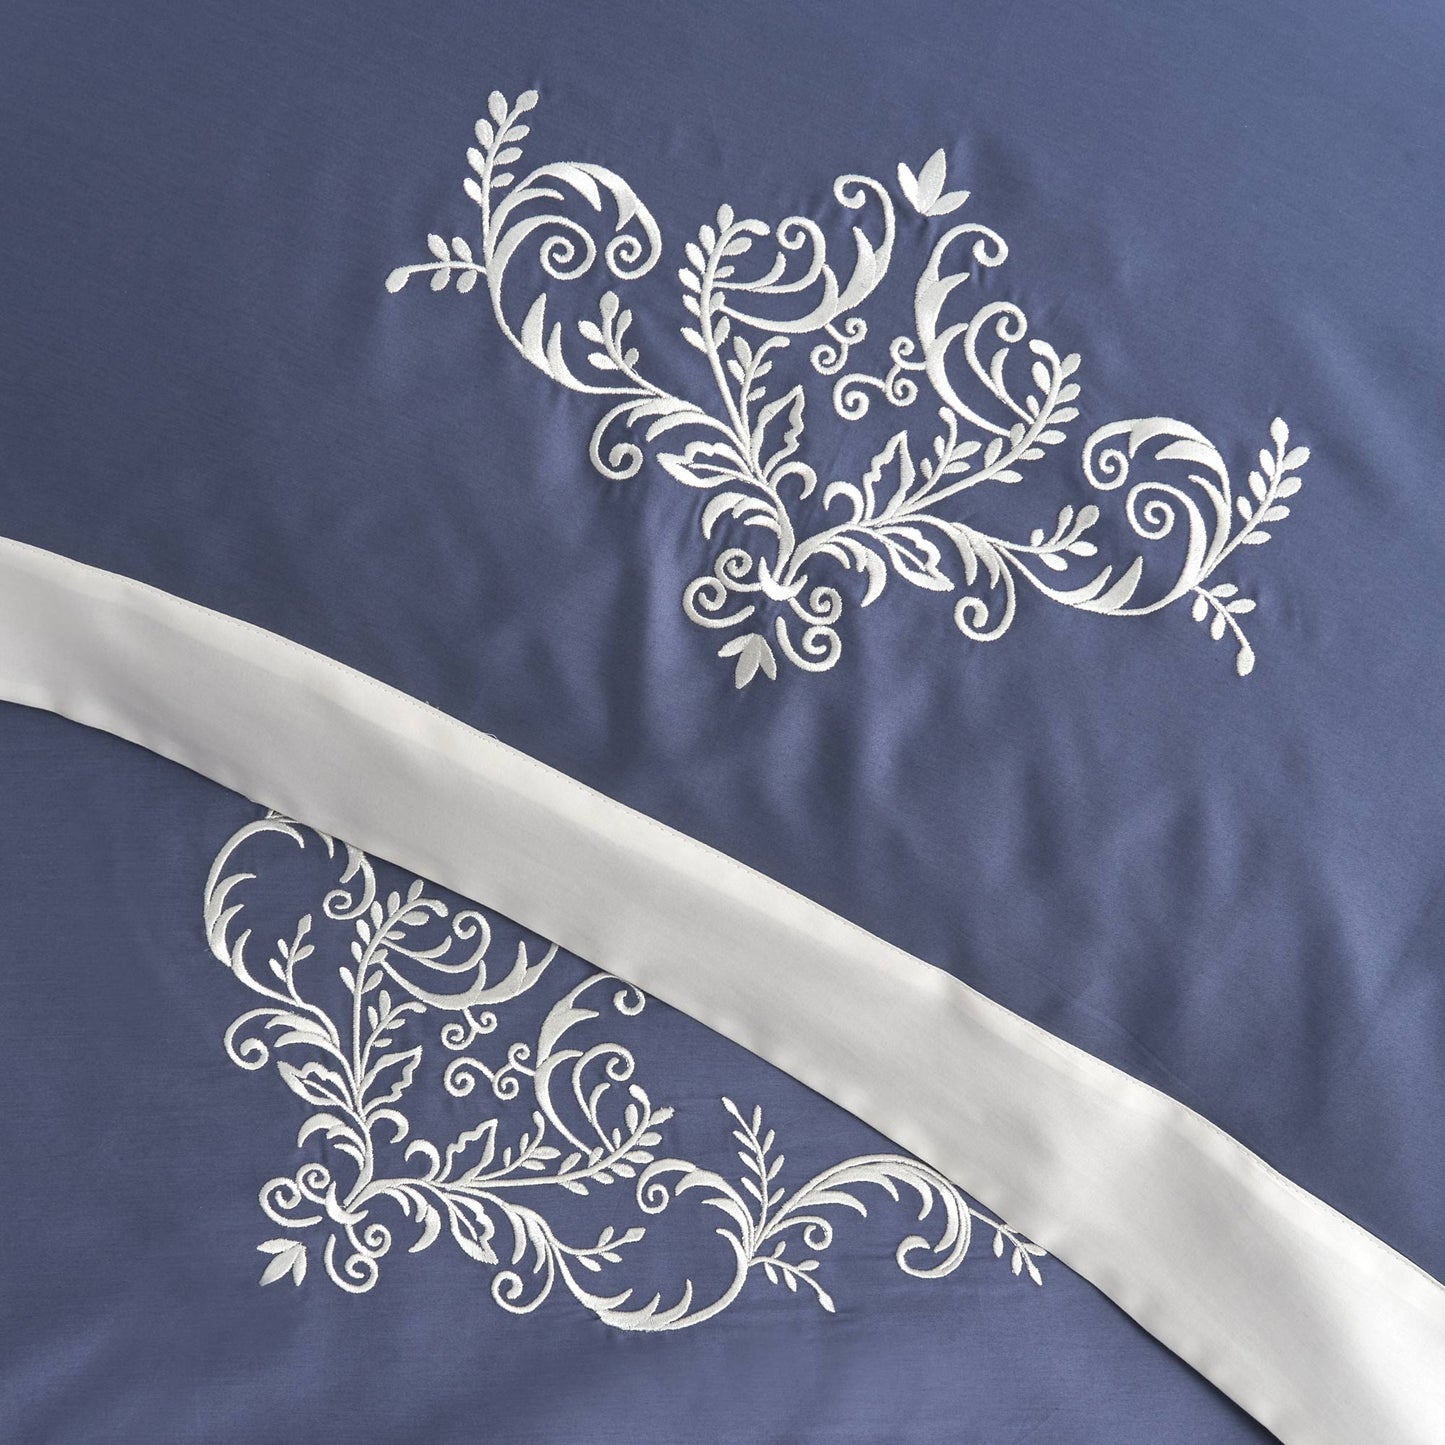 Duvet Cover Set in 300TC Cotton Satin with Embroidered Arabesque - Serenissima